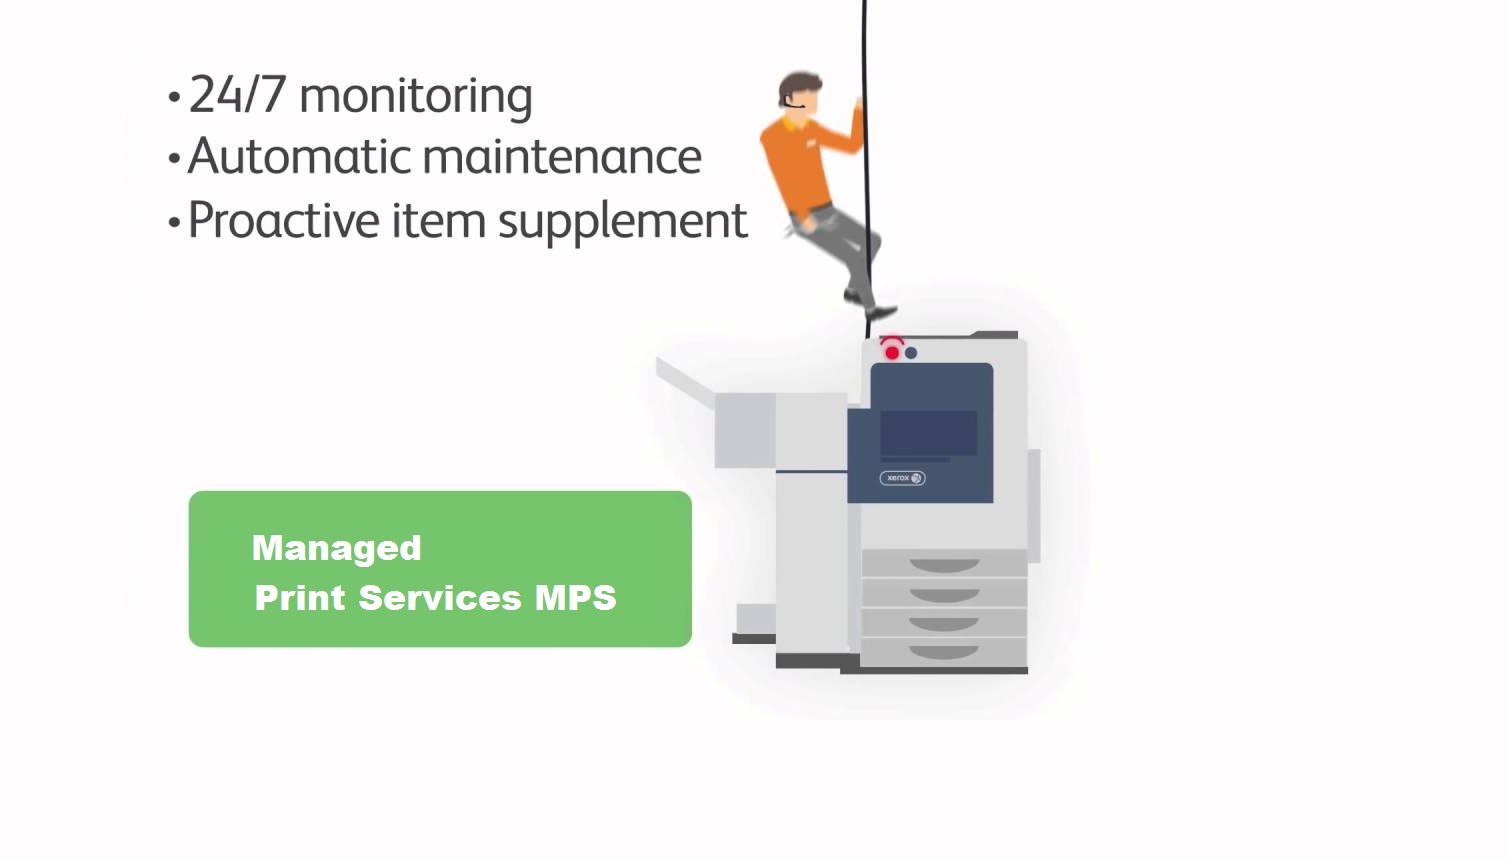 Xerox Managed Print Services MPS by Grafimedia